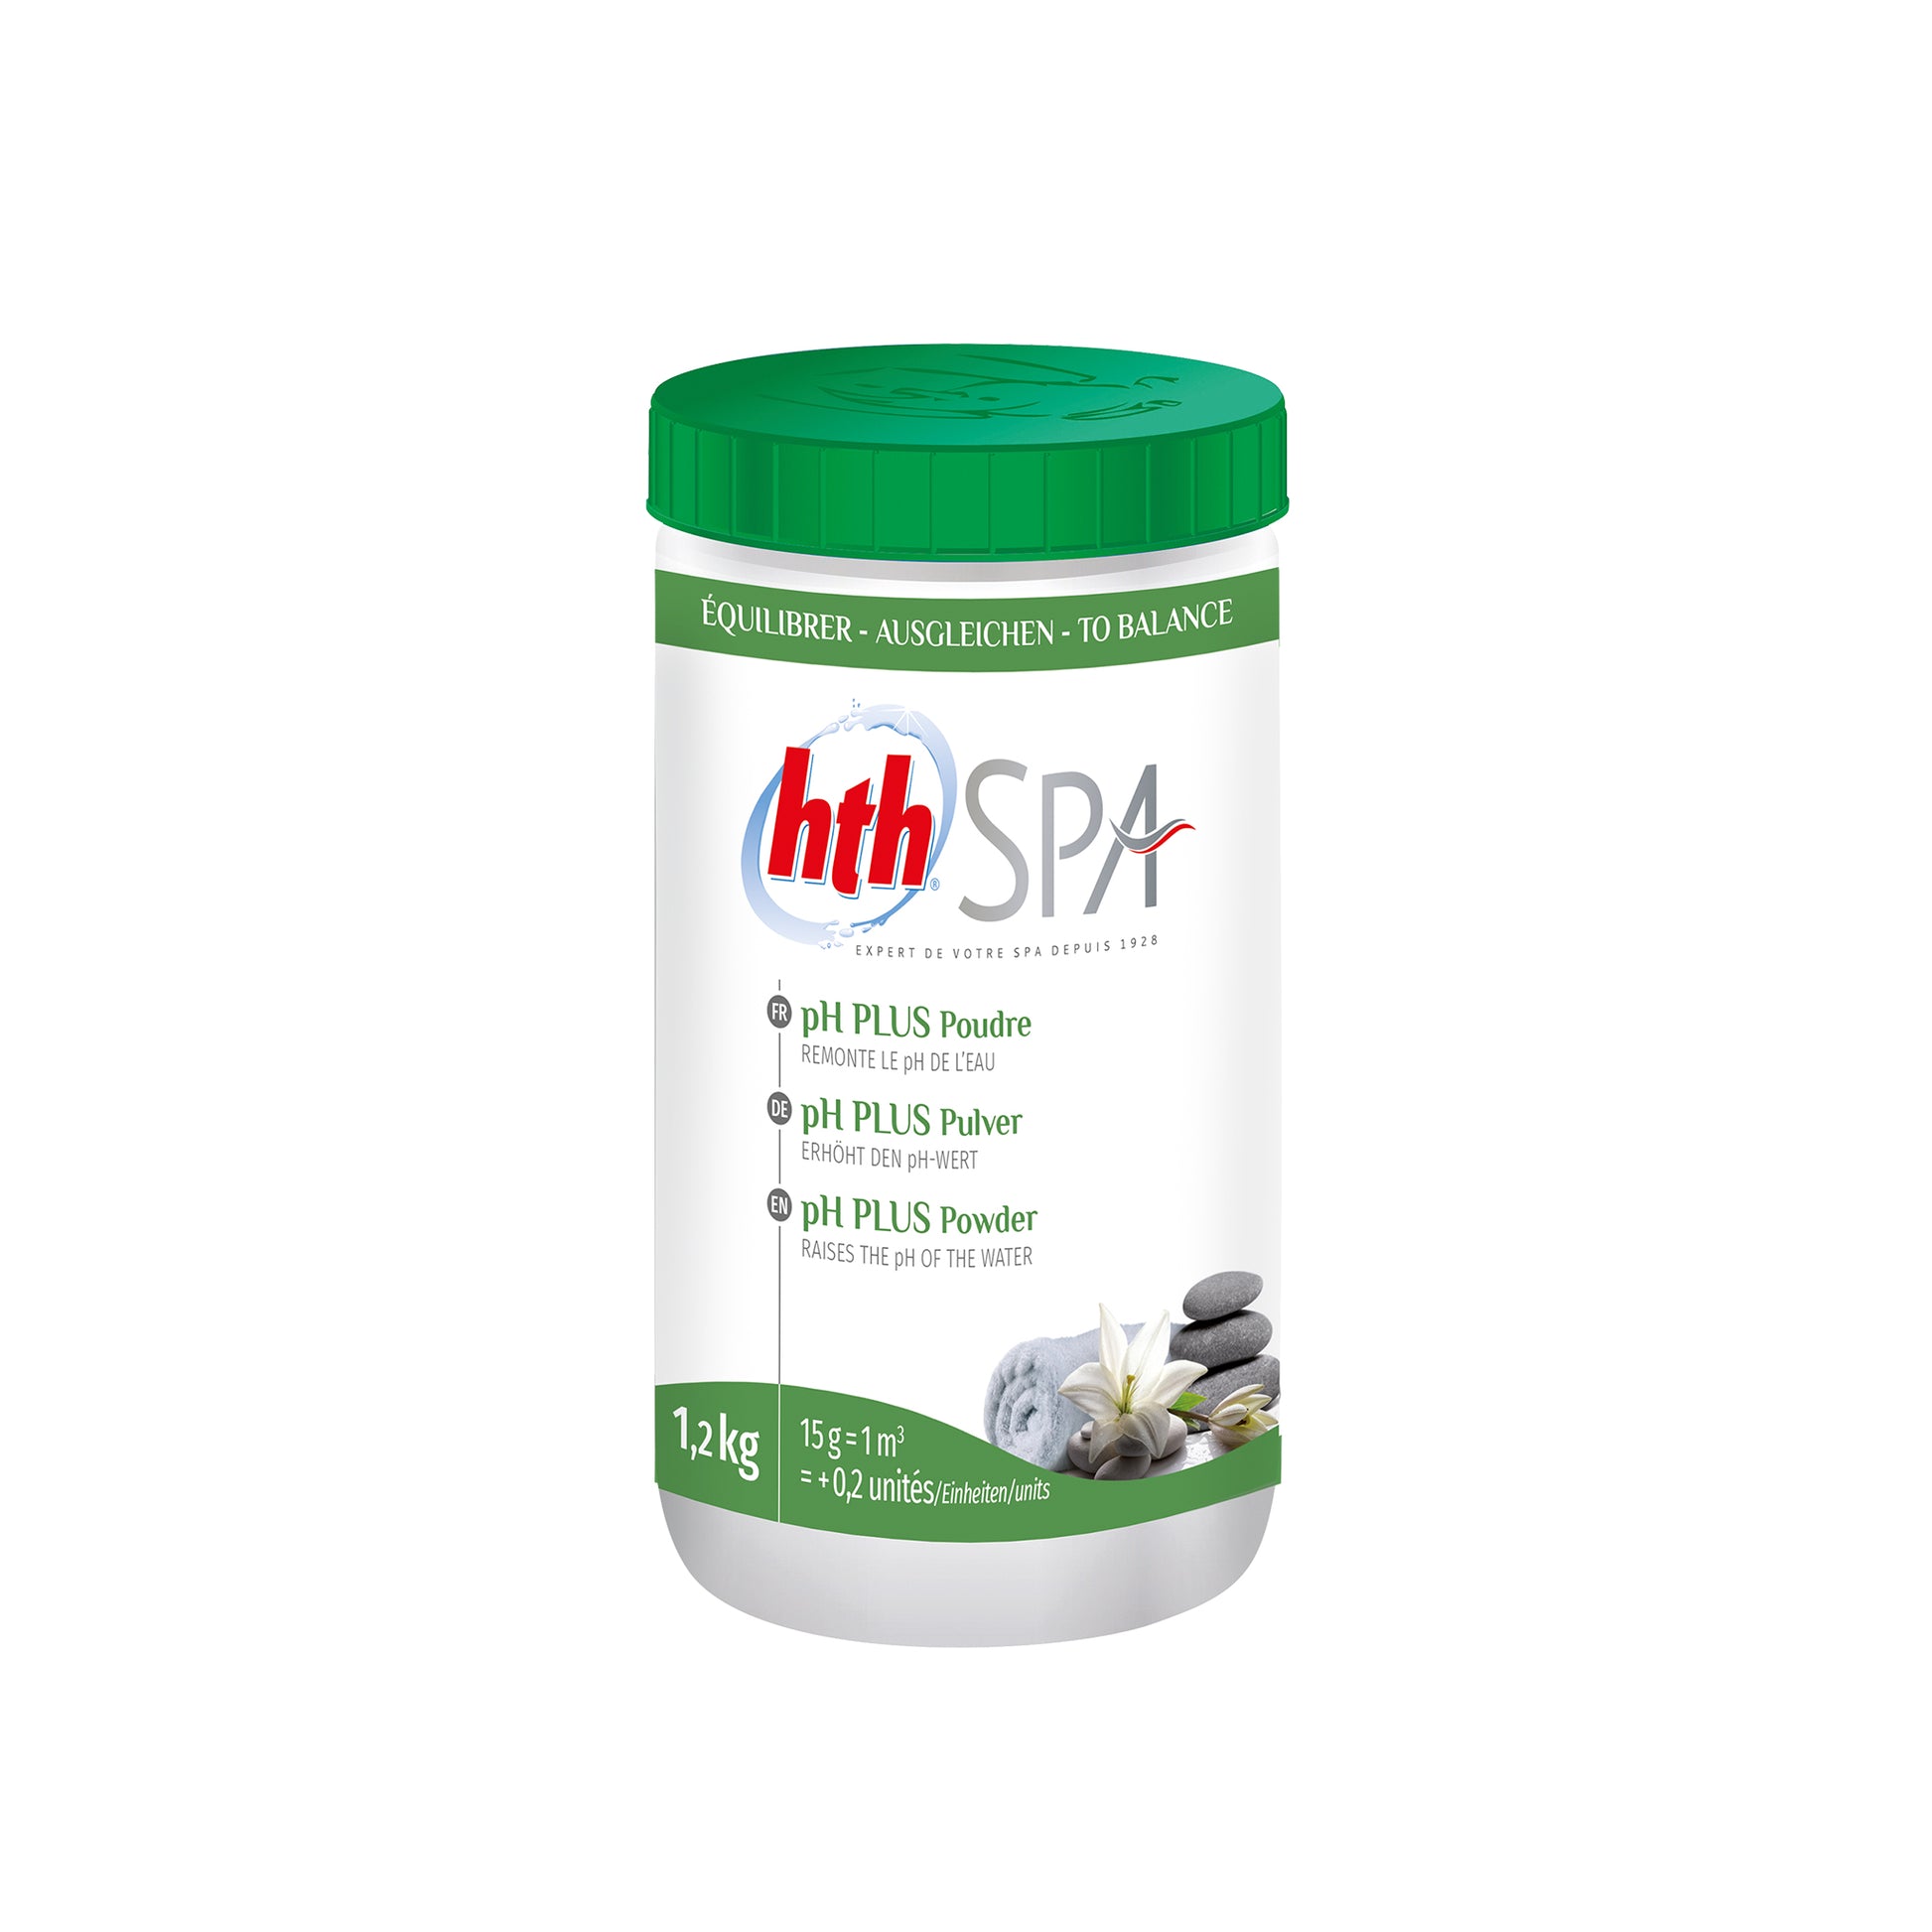 small tub of pH plus powder by HTH 1.2kg. White tub, green label and green lid.